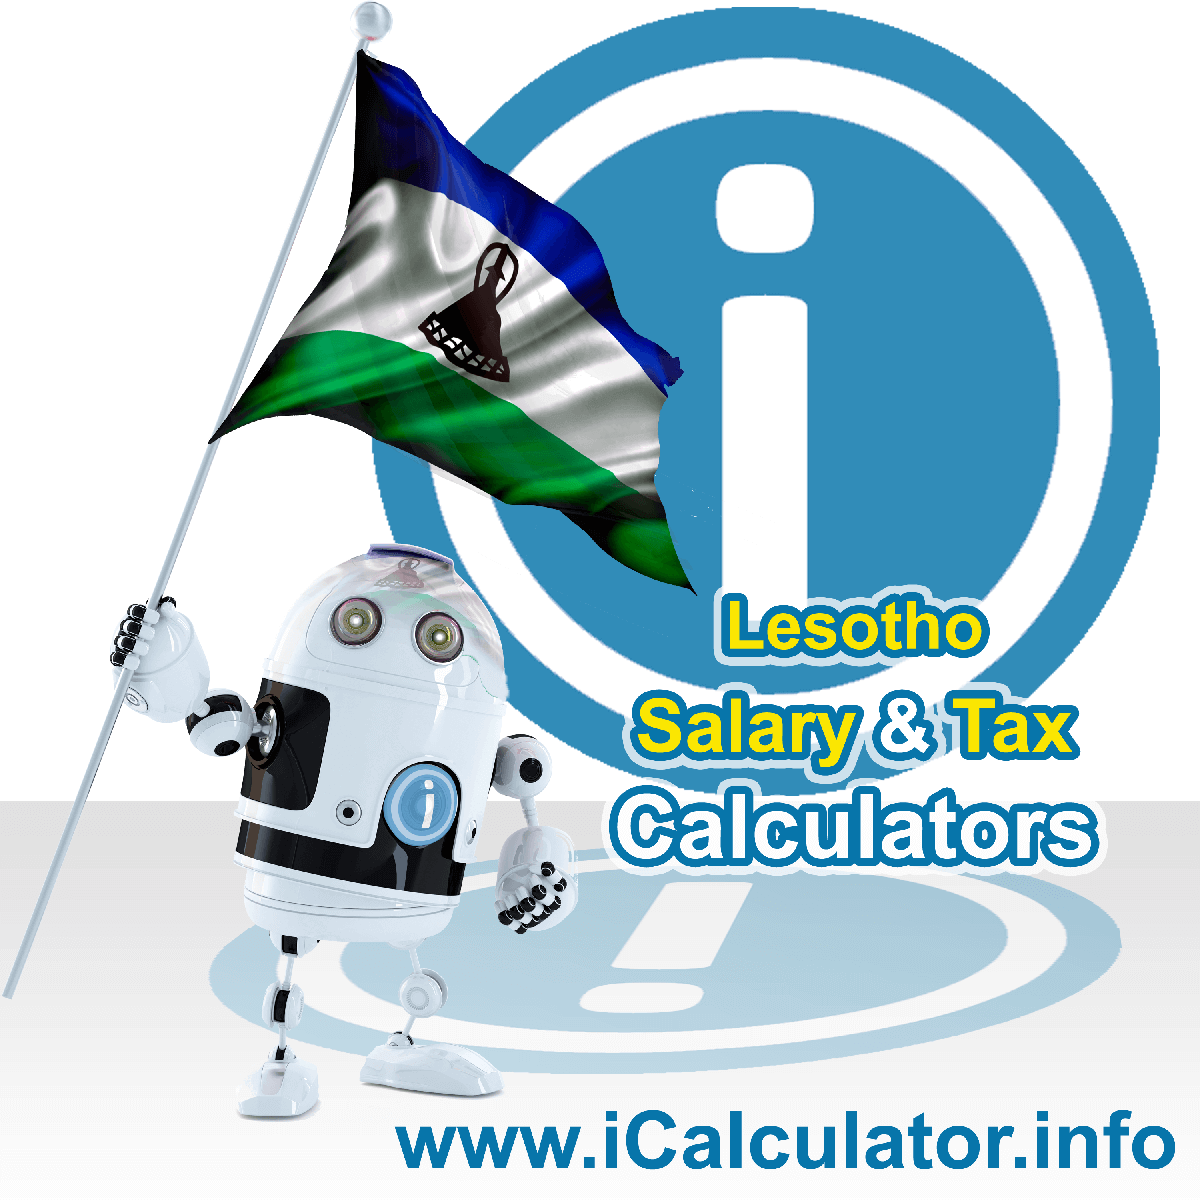 Lesotho Tax Calculator. This image shows the Lesotho flag and information relating to the tax formula for the Lesotho Salary Calculator